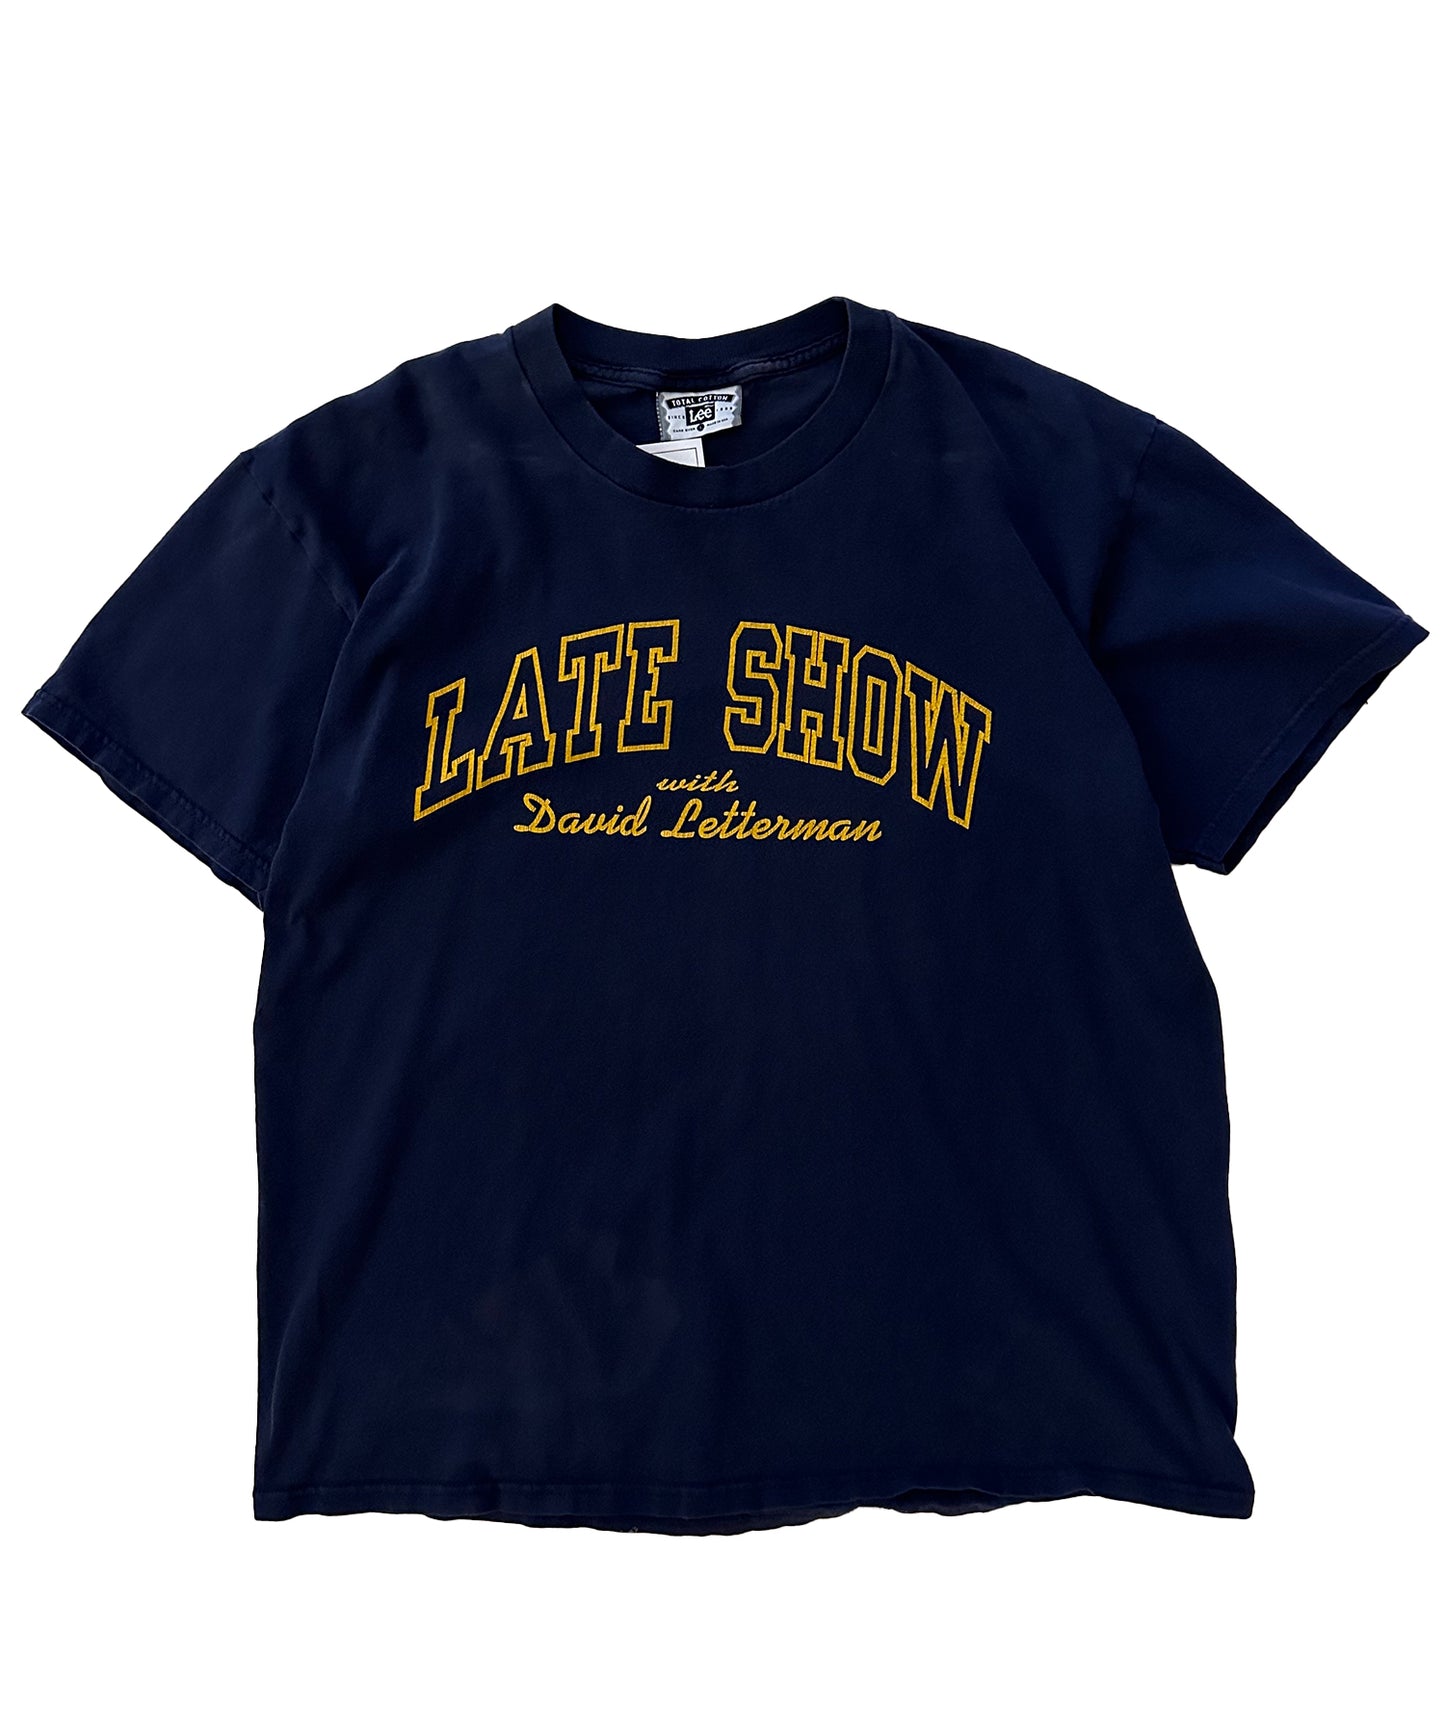 Vintage Late Show Tee (Large)